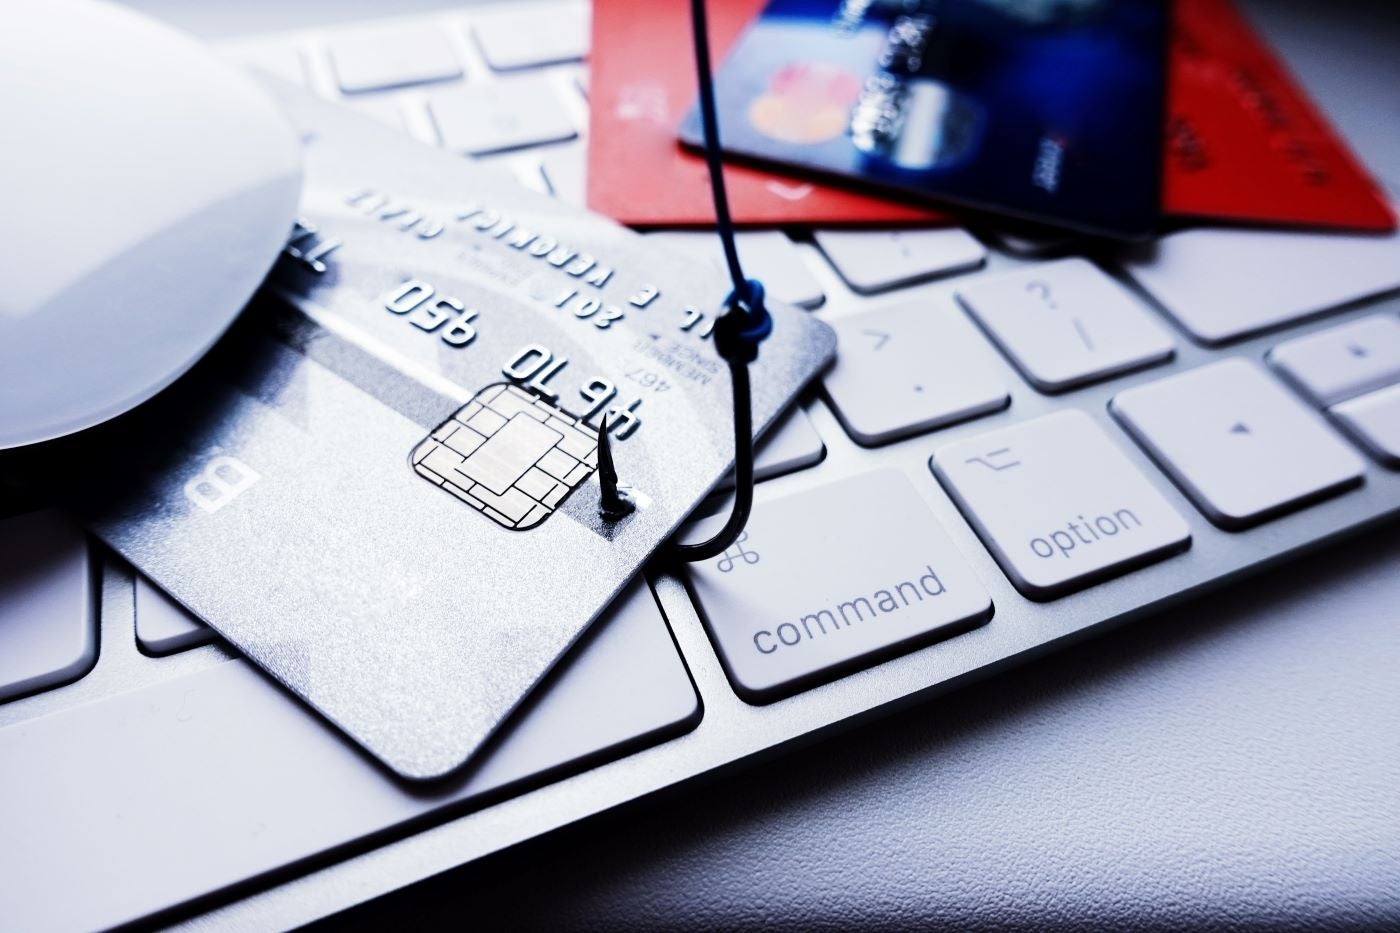 A fishing hook stuck to a credit card over a keyboard signaling phishing.